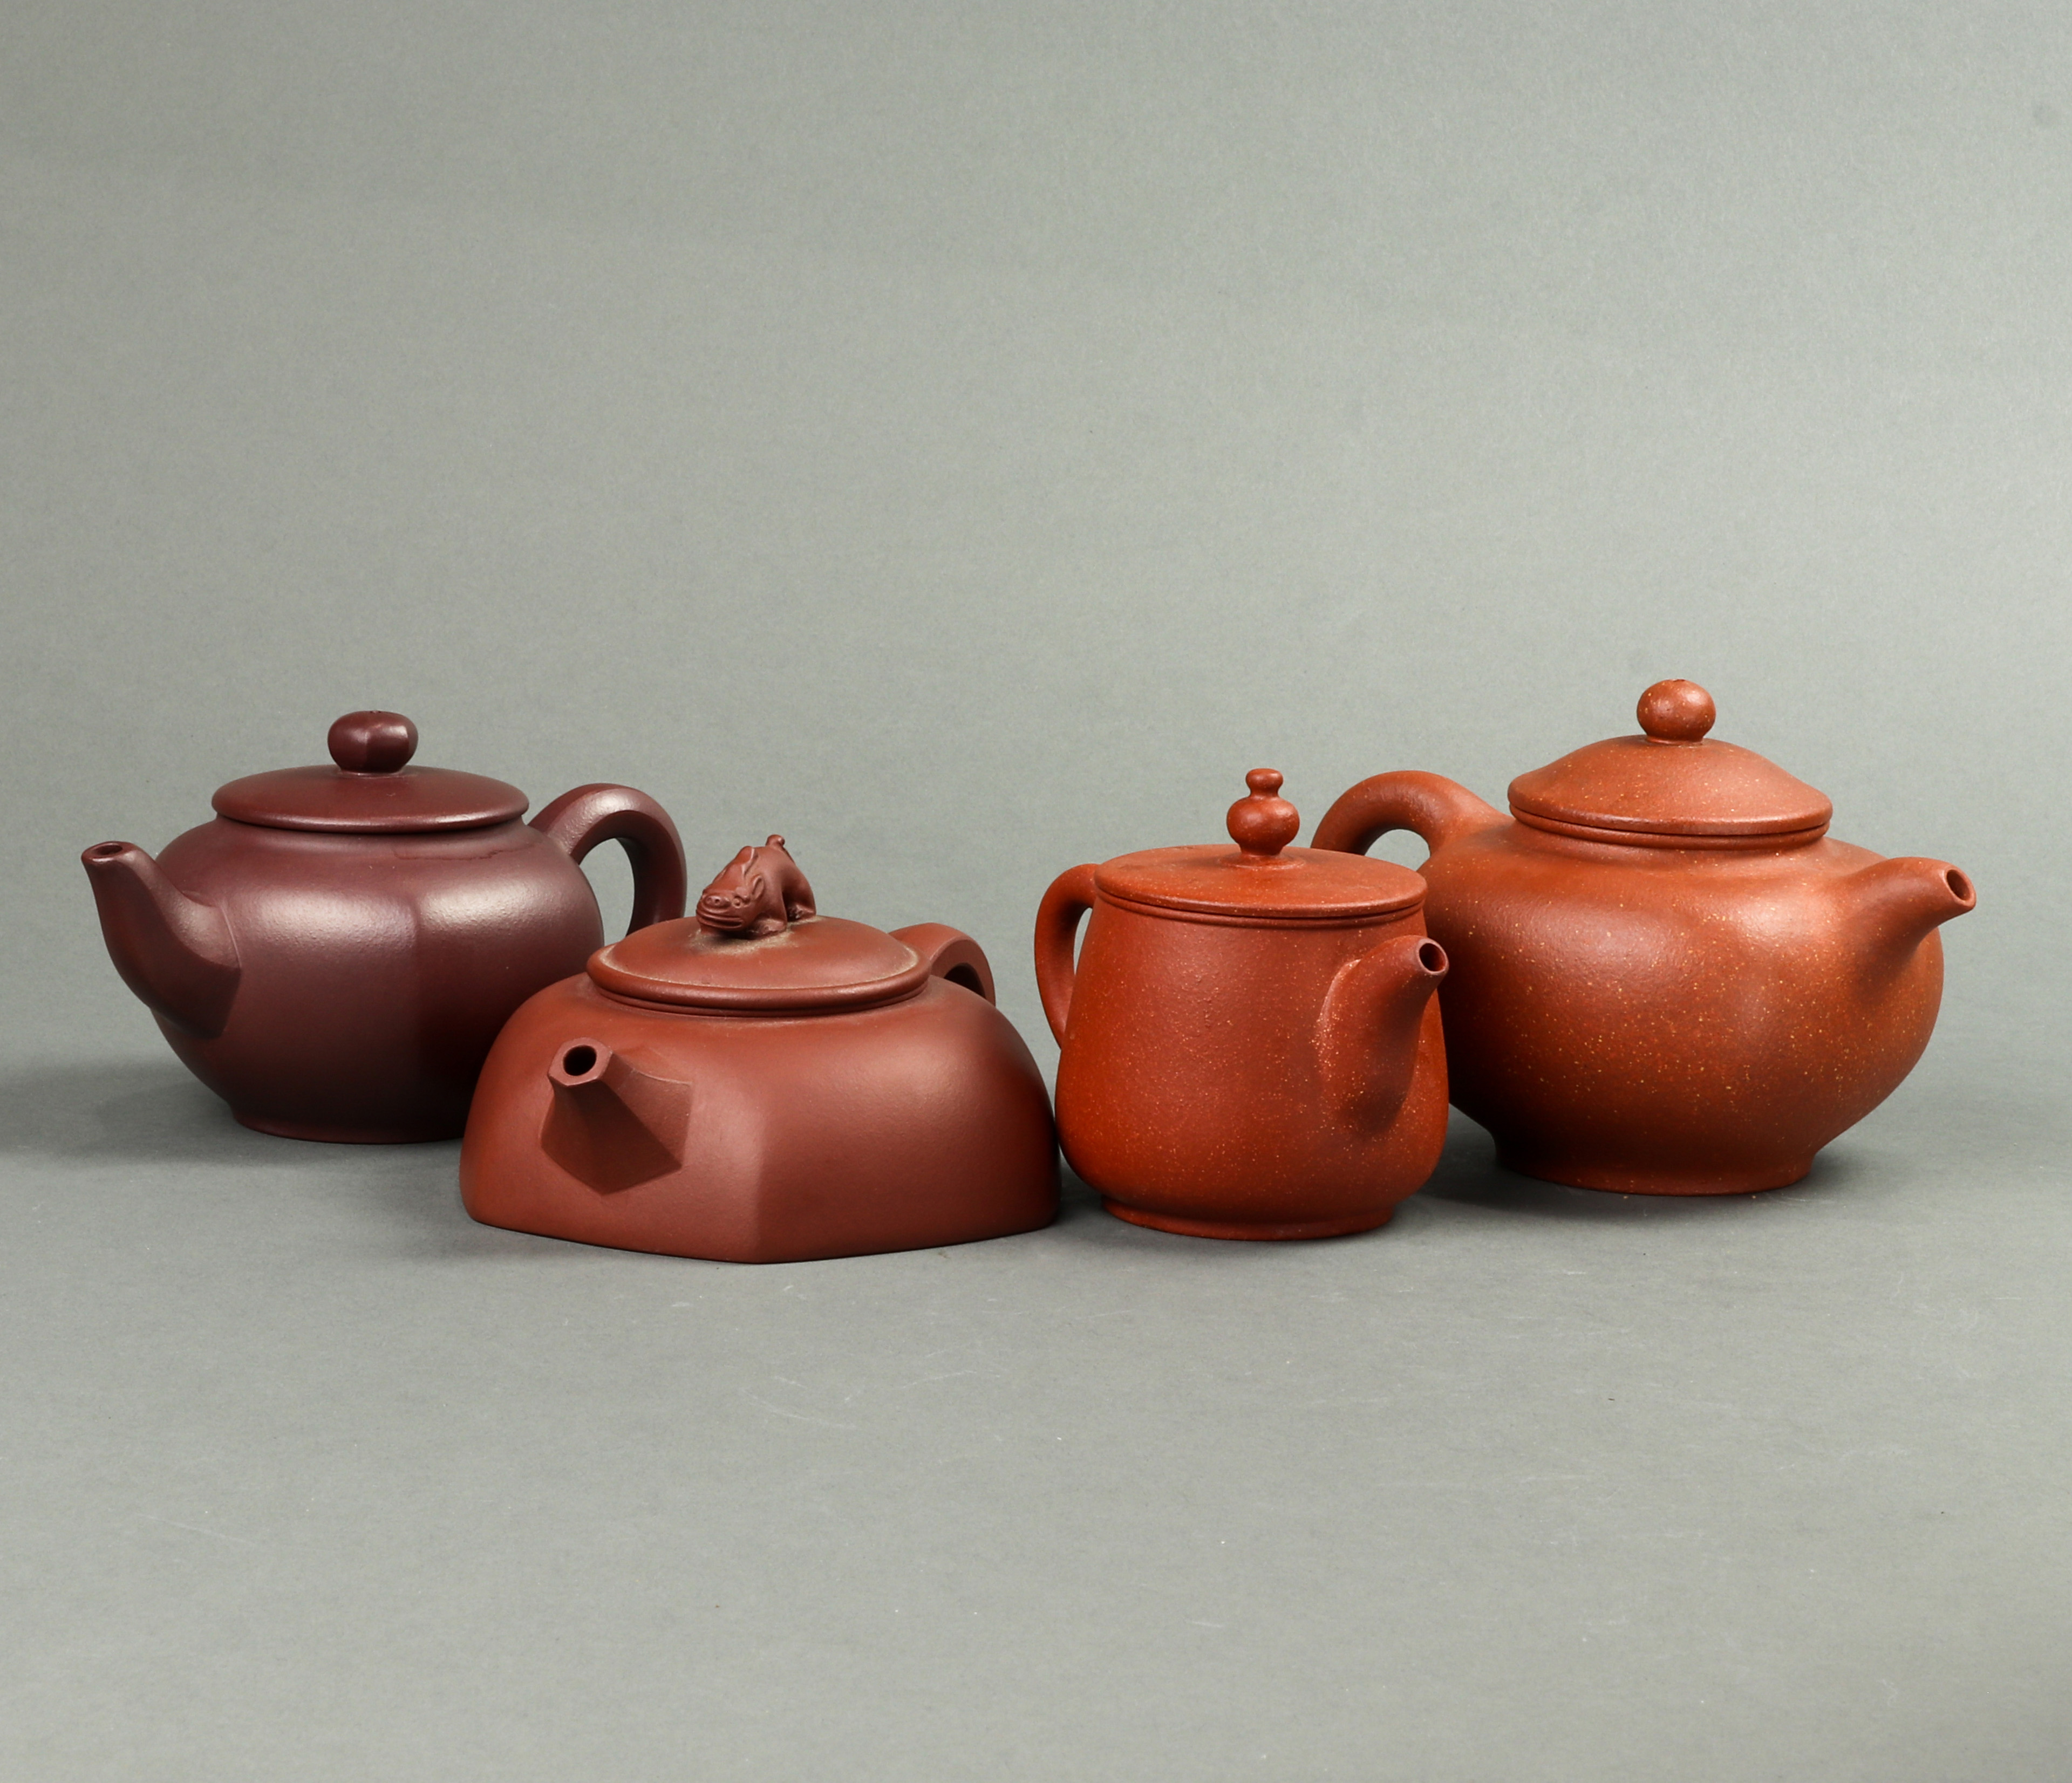  LOT OF 4 CHINESE YIXING TEAPOTS 3a4dd9